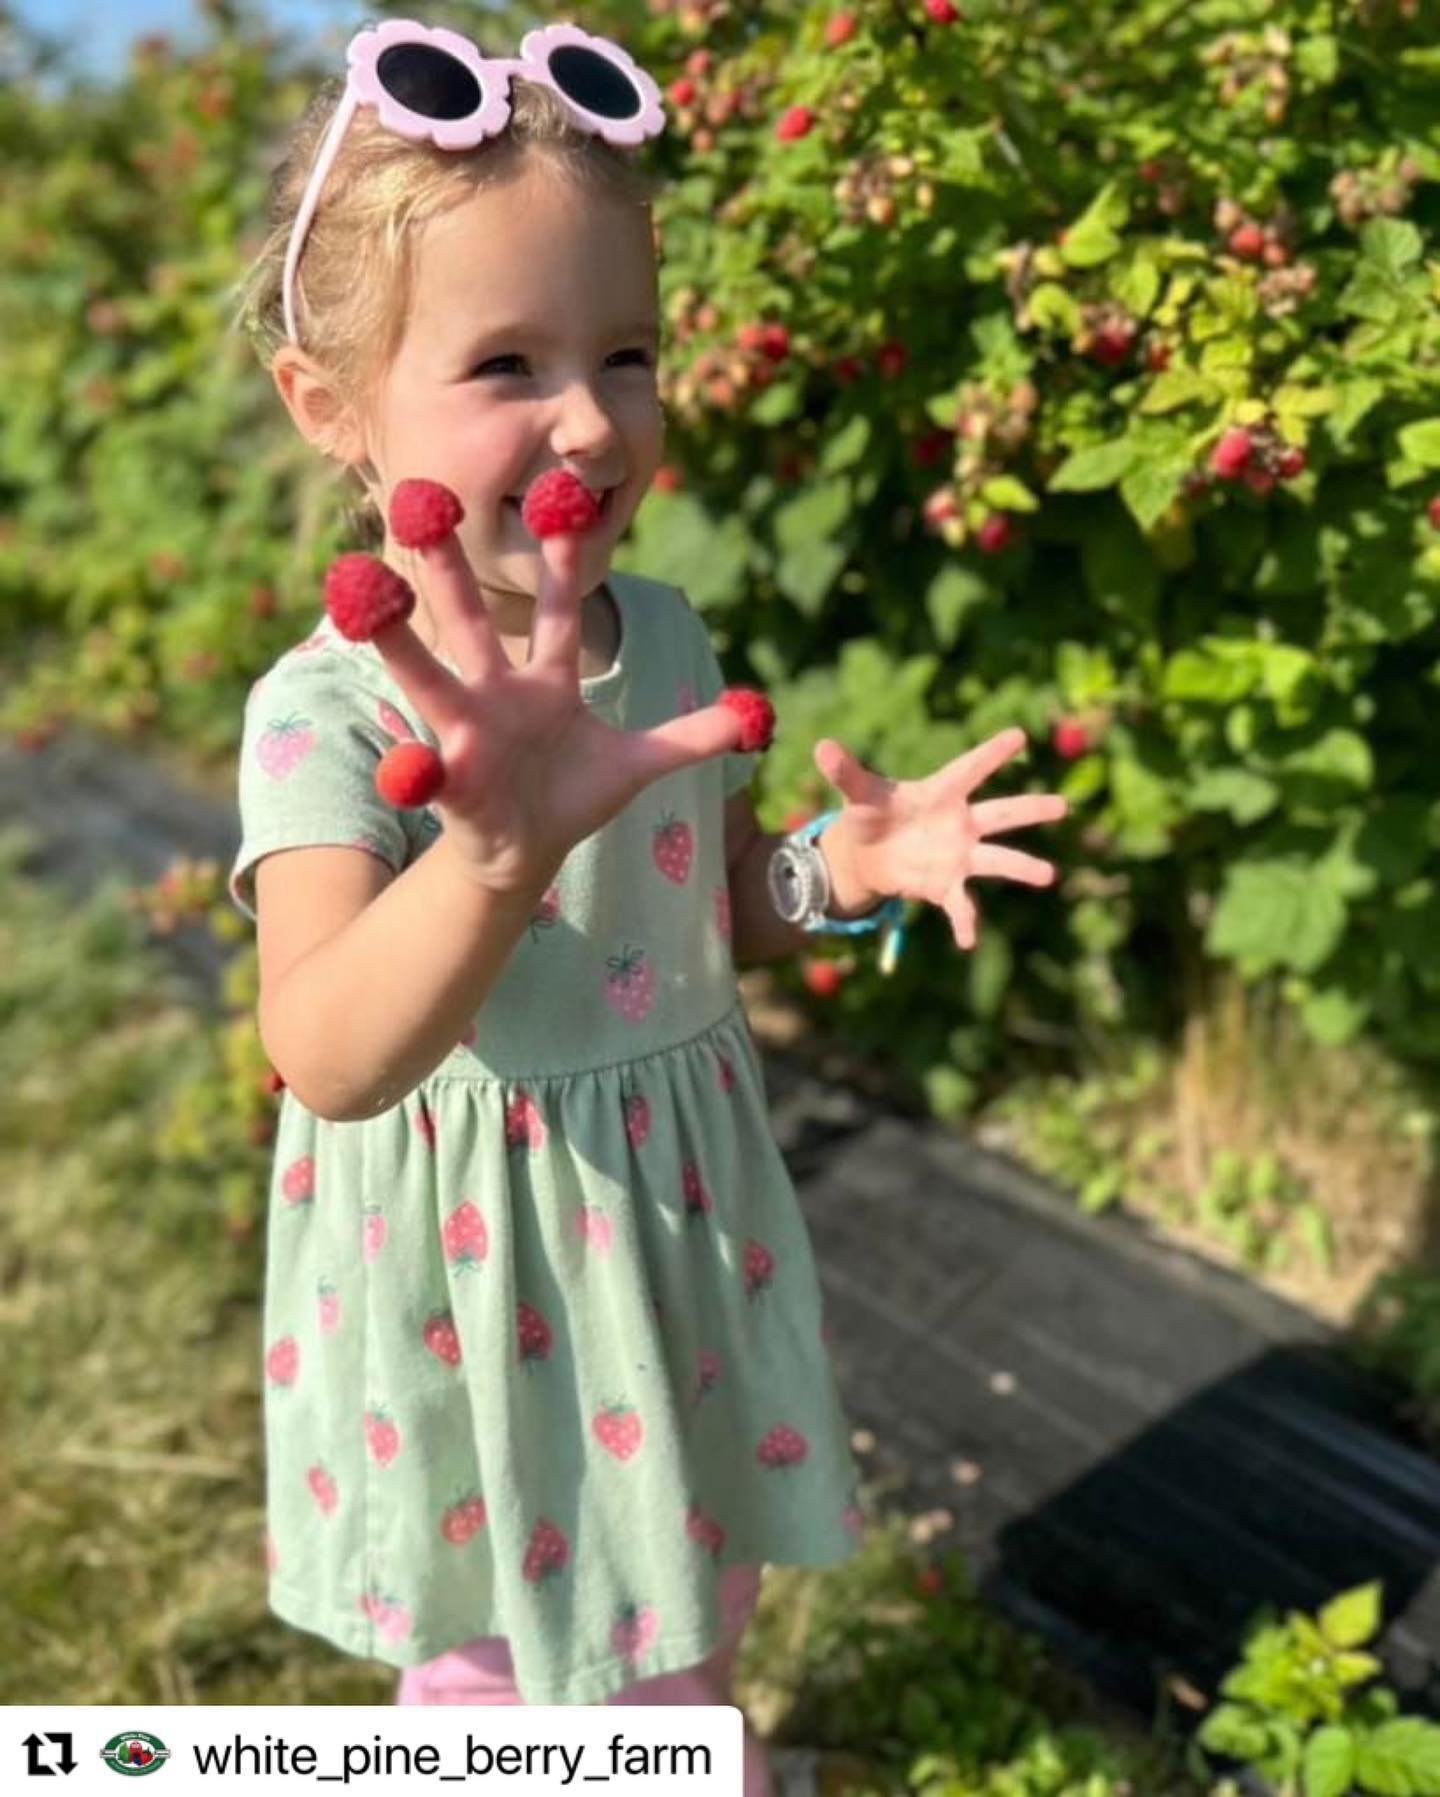 The official start of brisk fall weather may be just around the corner, but there is still some outdoor fun to be had! Make the most of it by heading out to @White_Pine_Berry_Farm this weekend for some family friendly fun at the farm. 🤩

Repost @whi